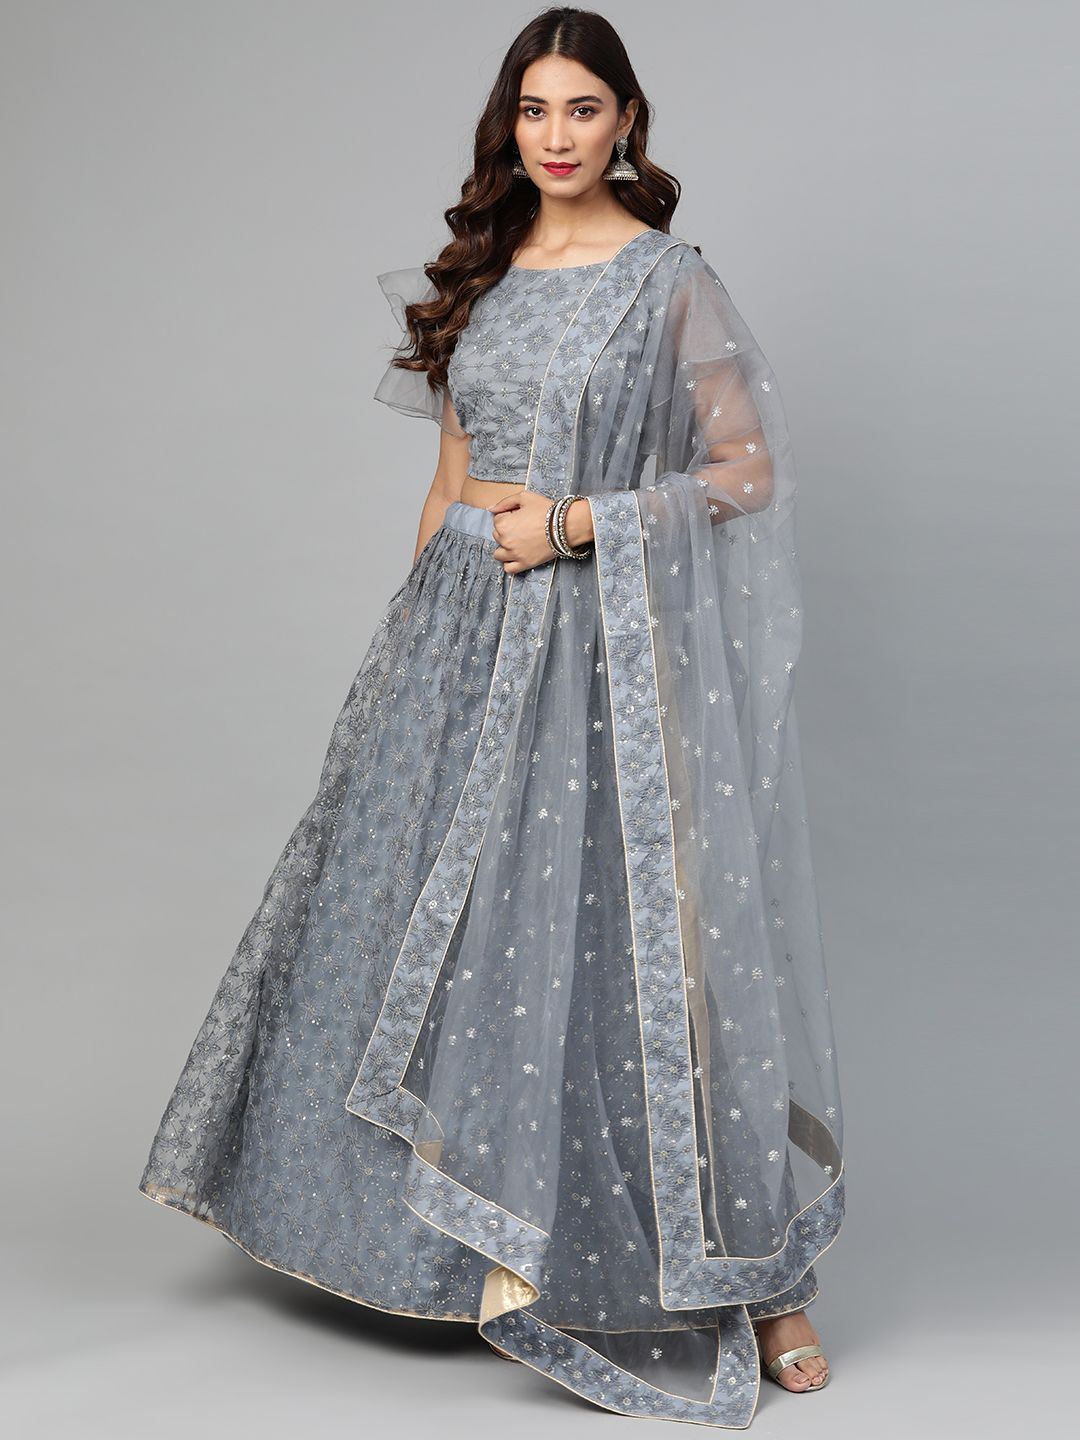 SHOPGARB Grey & Silver Embroidered Semi-Stitched Lehenga & Unstitched Blouse with Dupatta Price in India